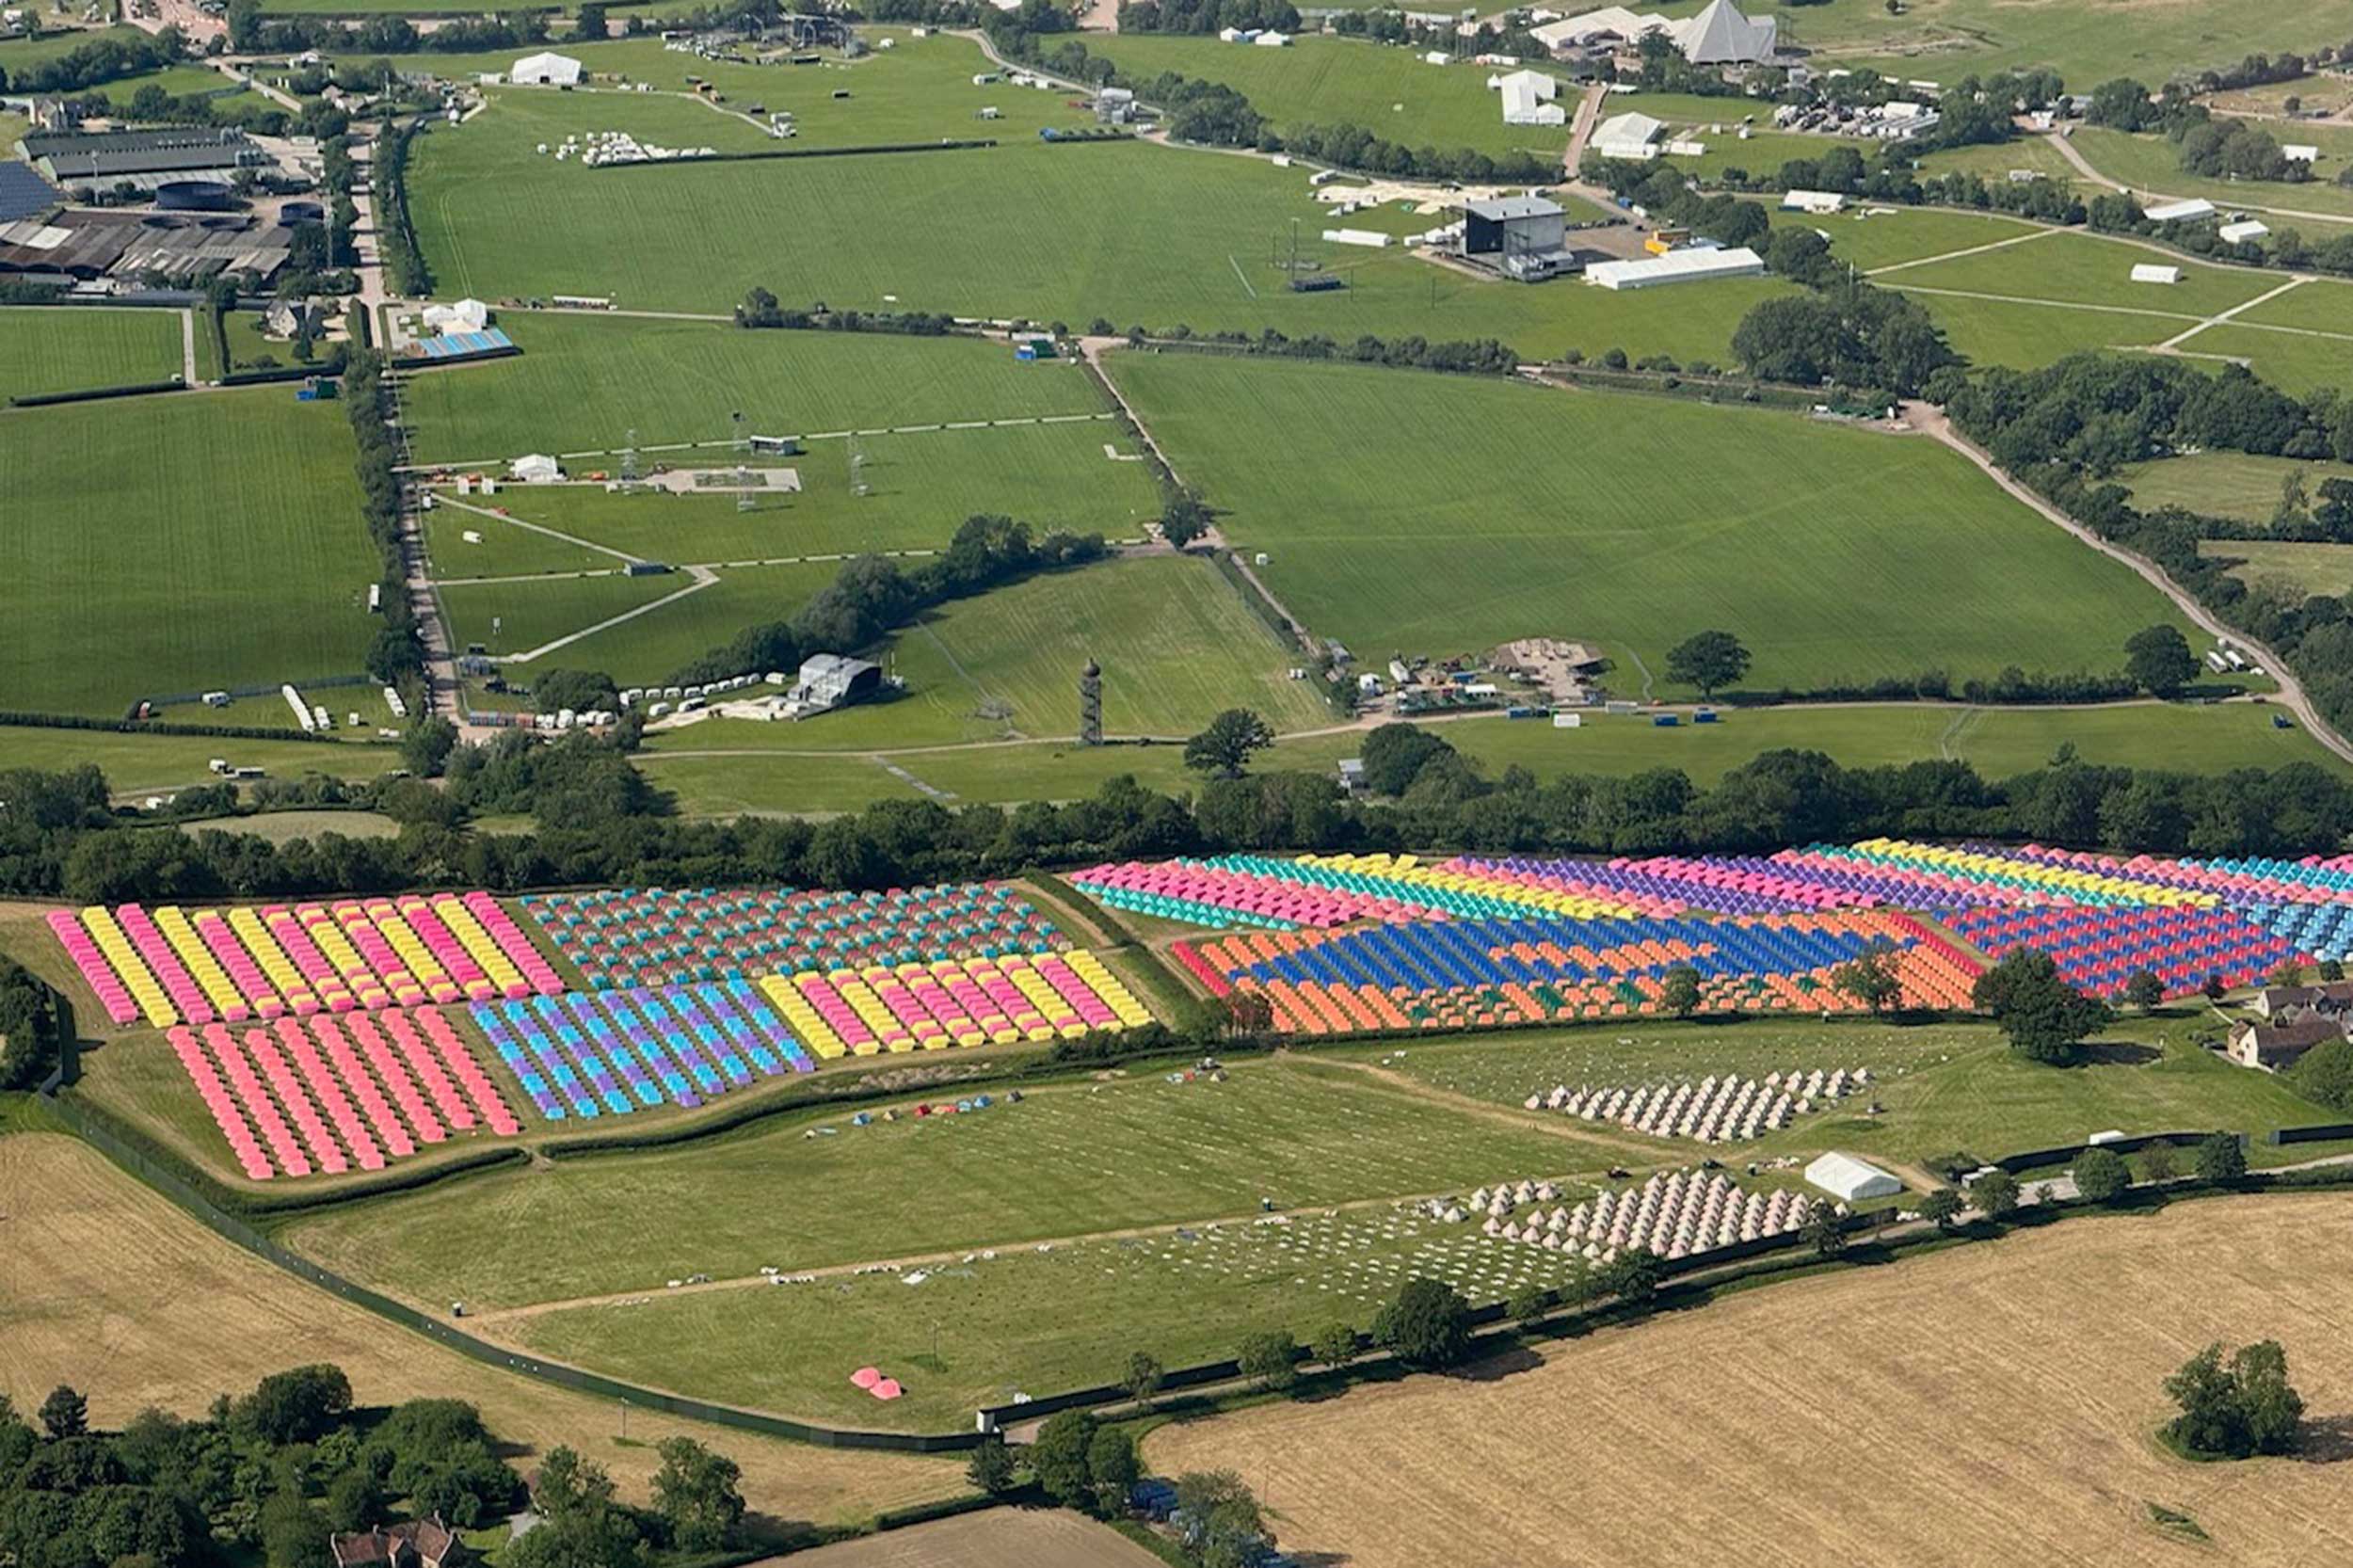 Glastonbury Festival from the air